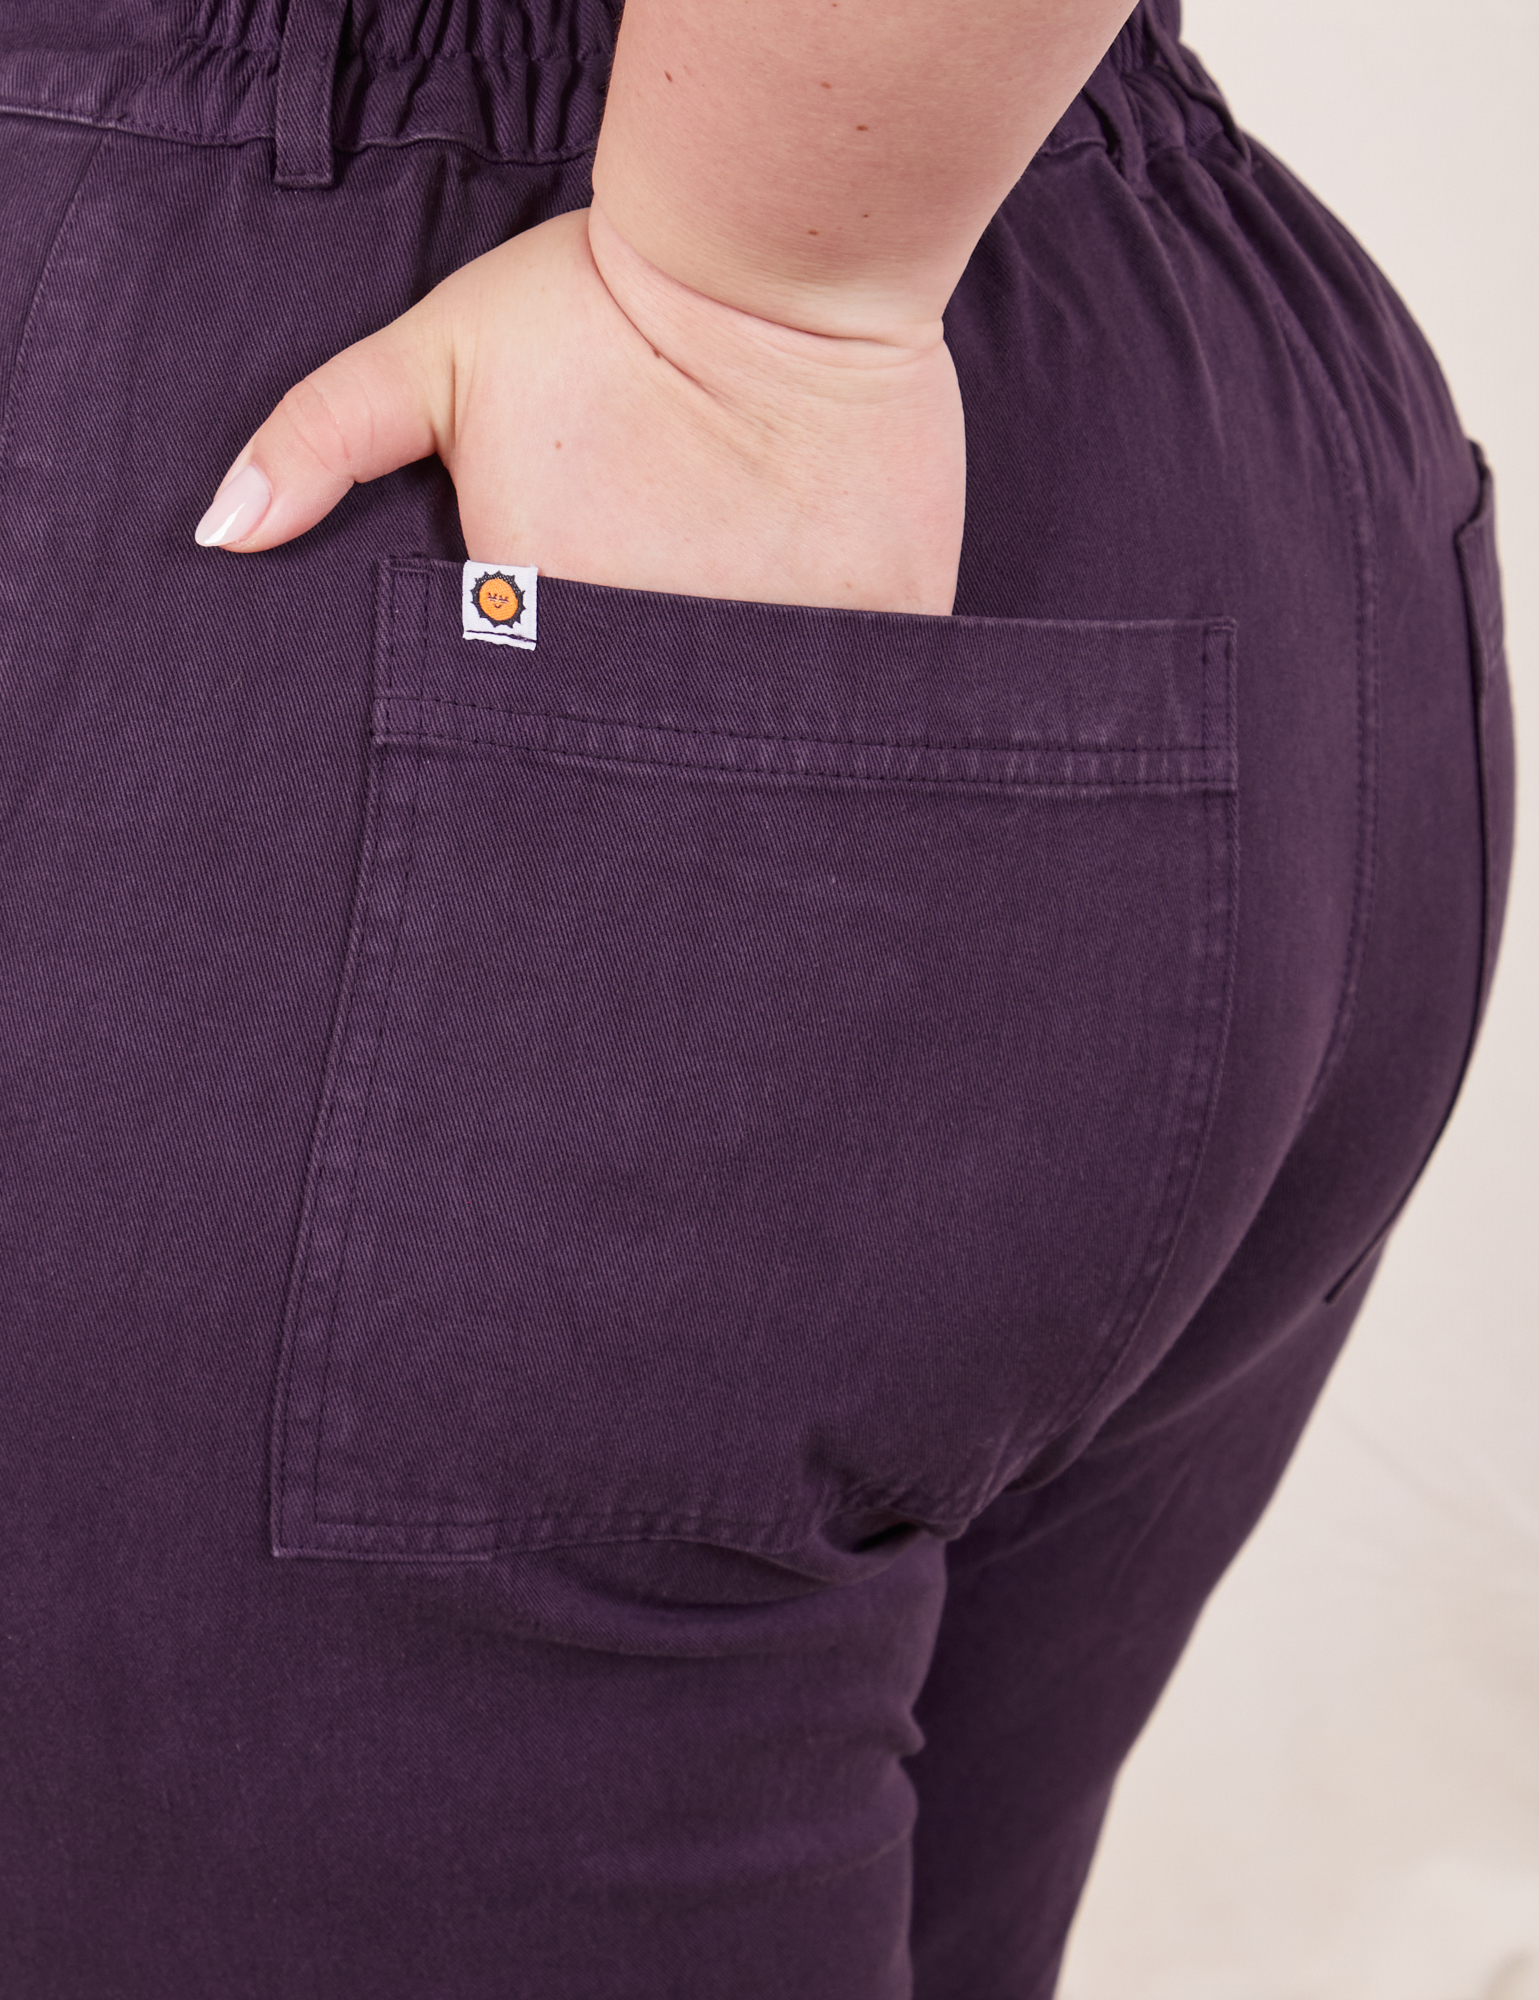 Back pocket close up of Short Sleeve Jumpsuit in Nebula Purple. Ashley has her hand in the pocket.